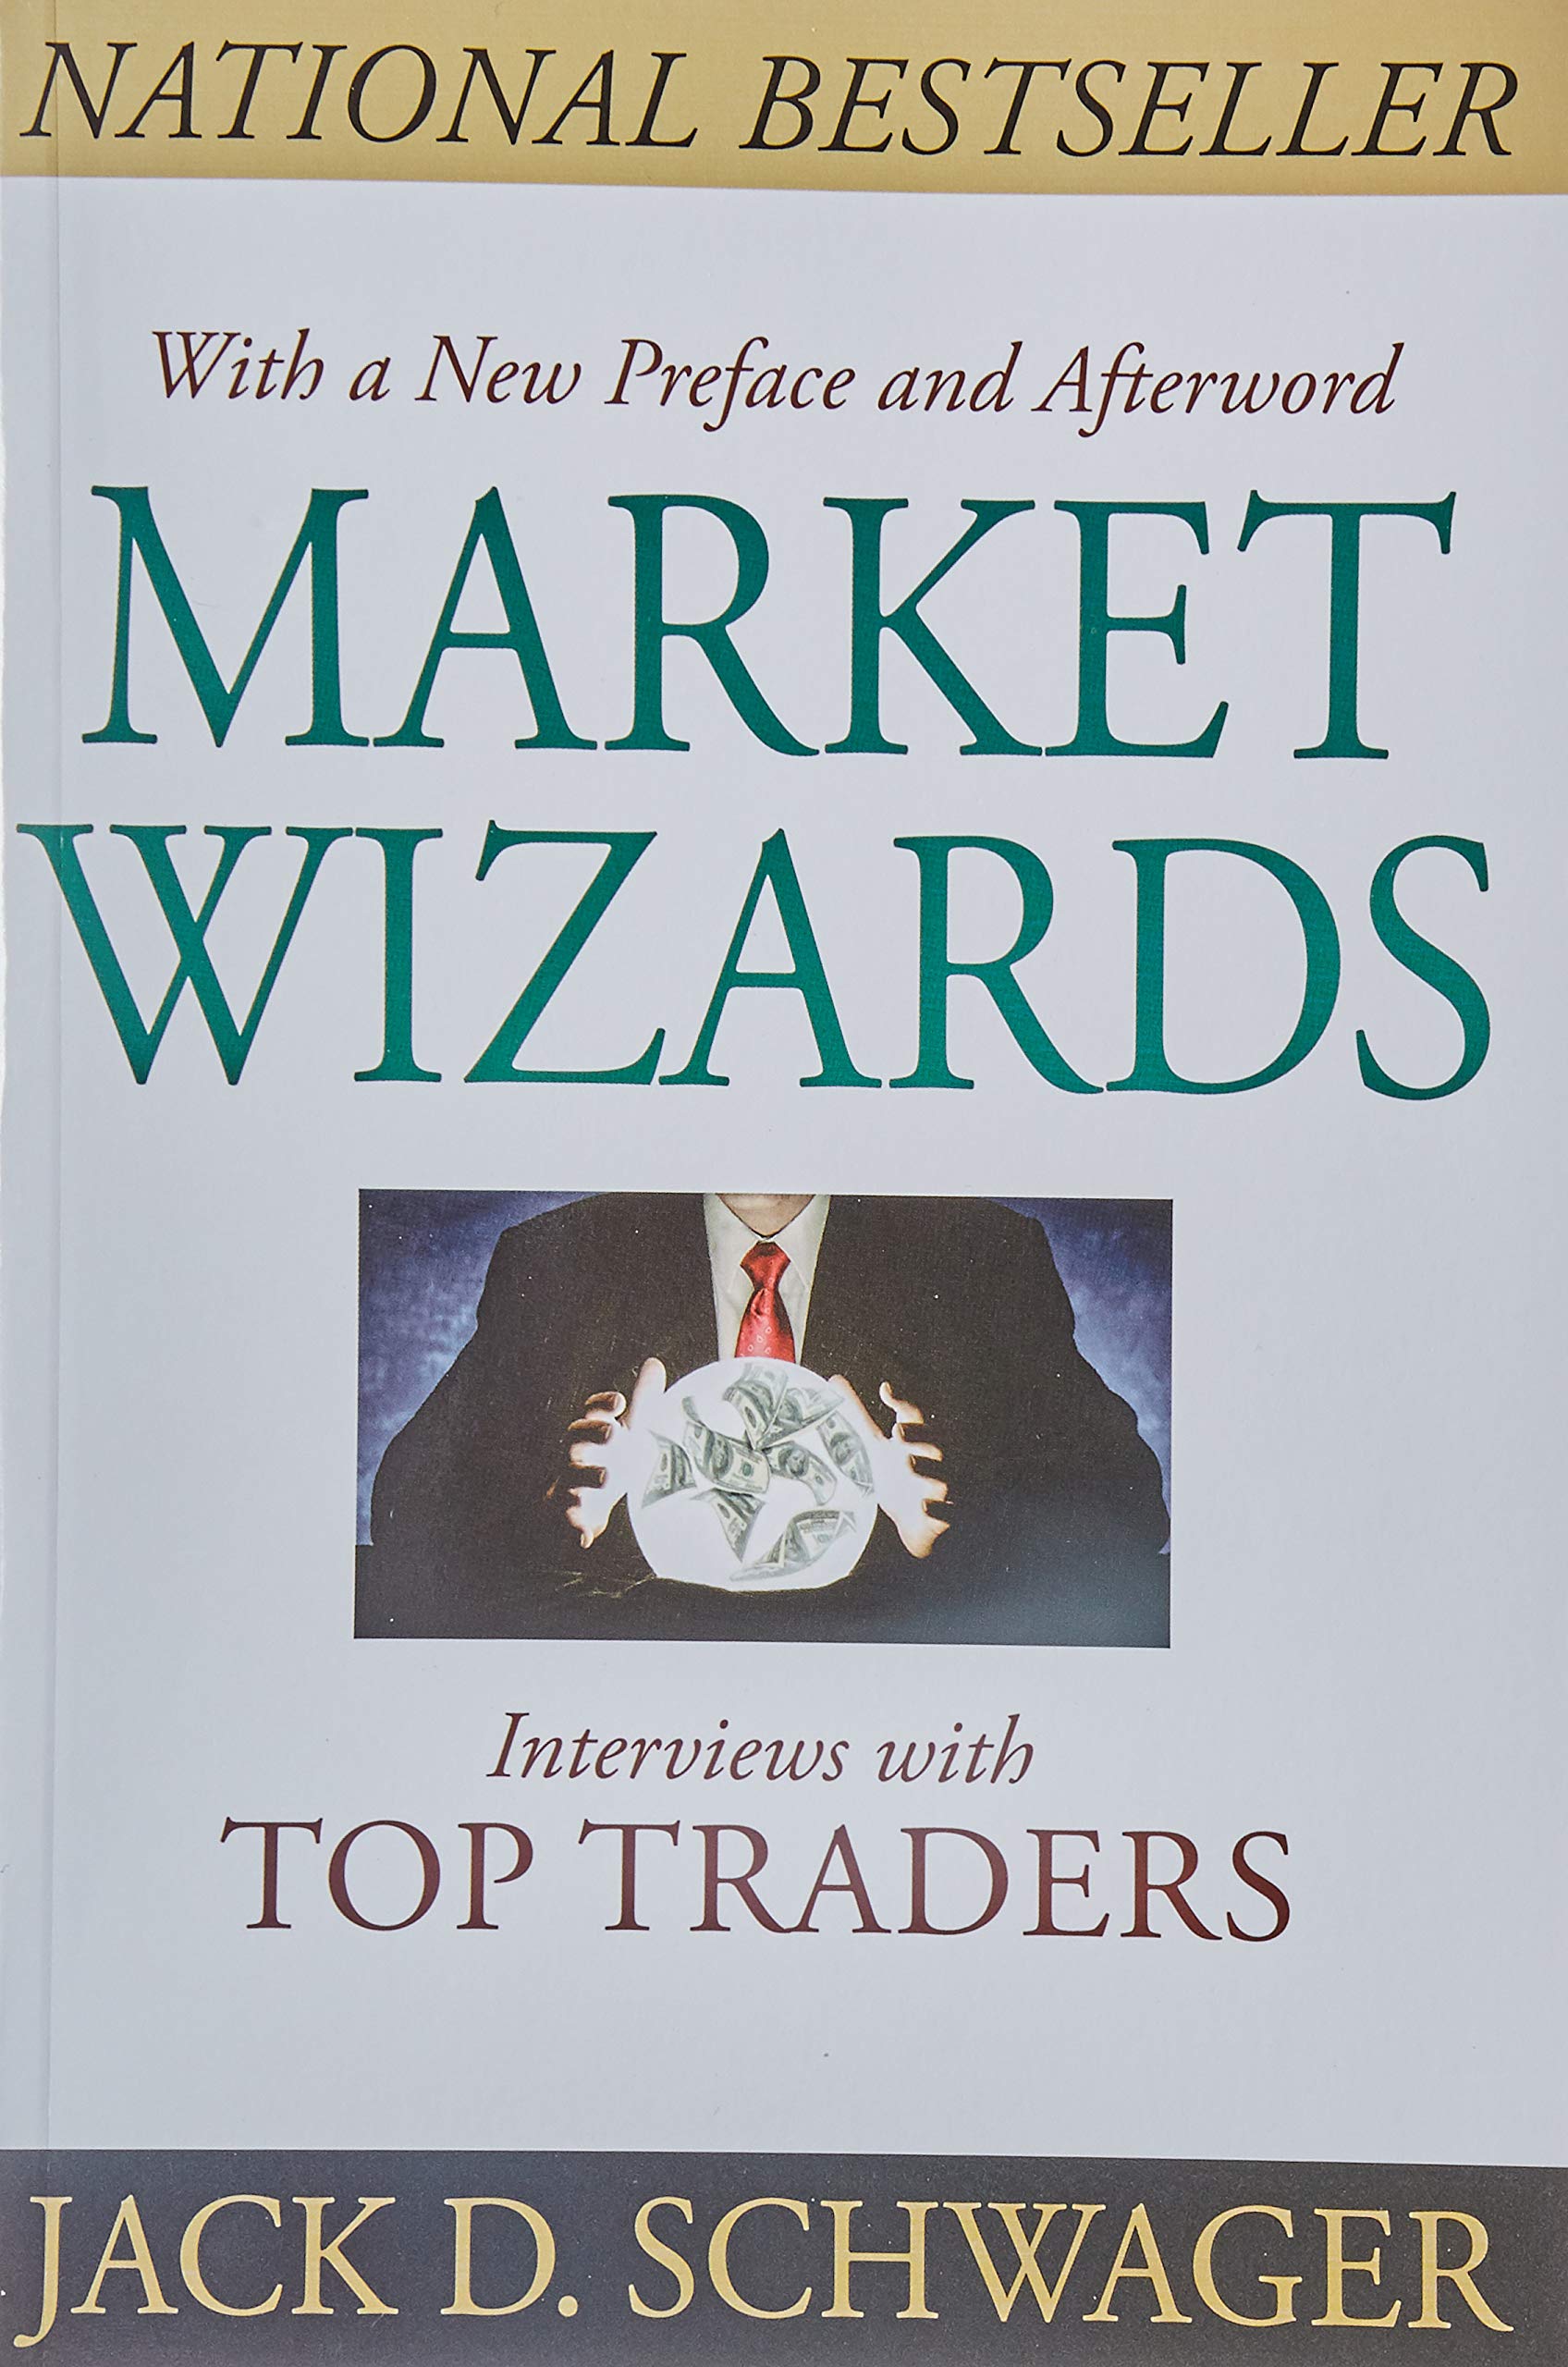 Top 20 Best Technical Analysis Books To Elevate Your Trading Techniques - 8144MxXlqNL